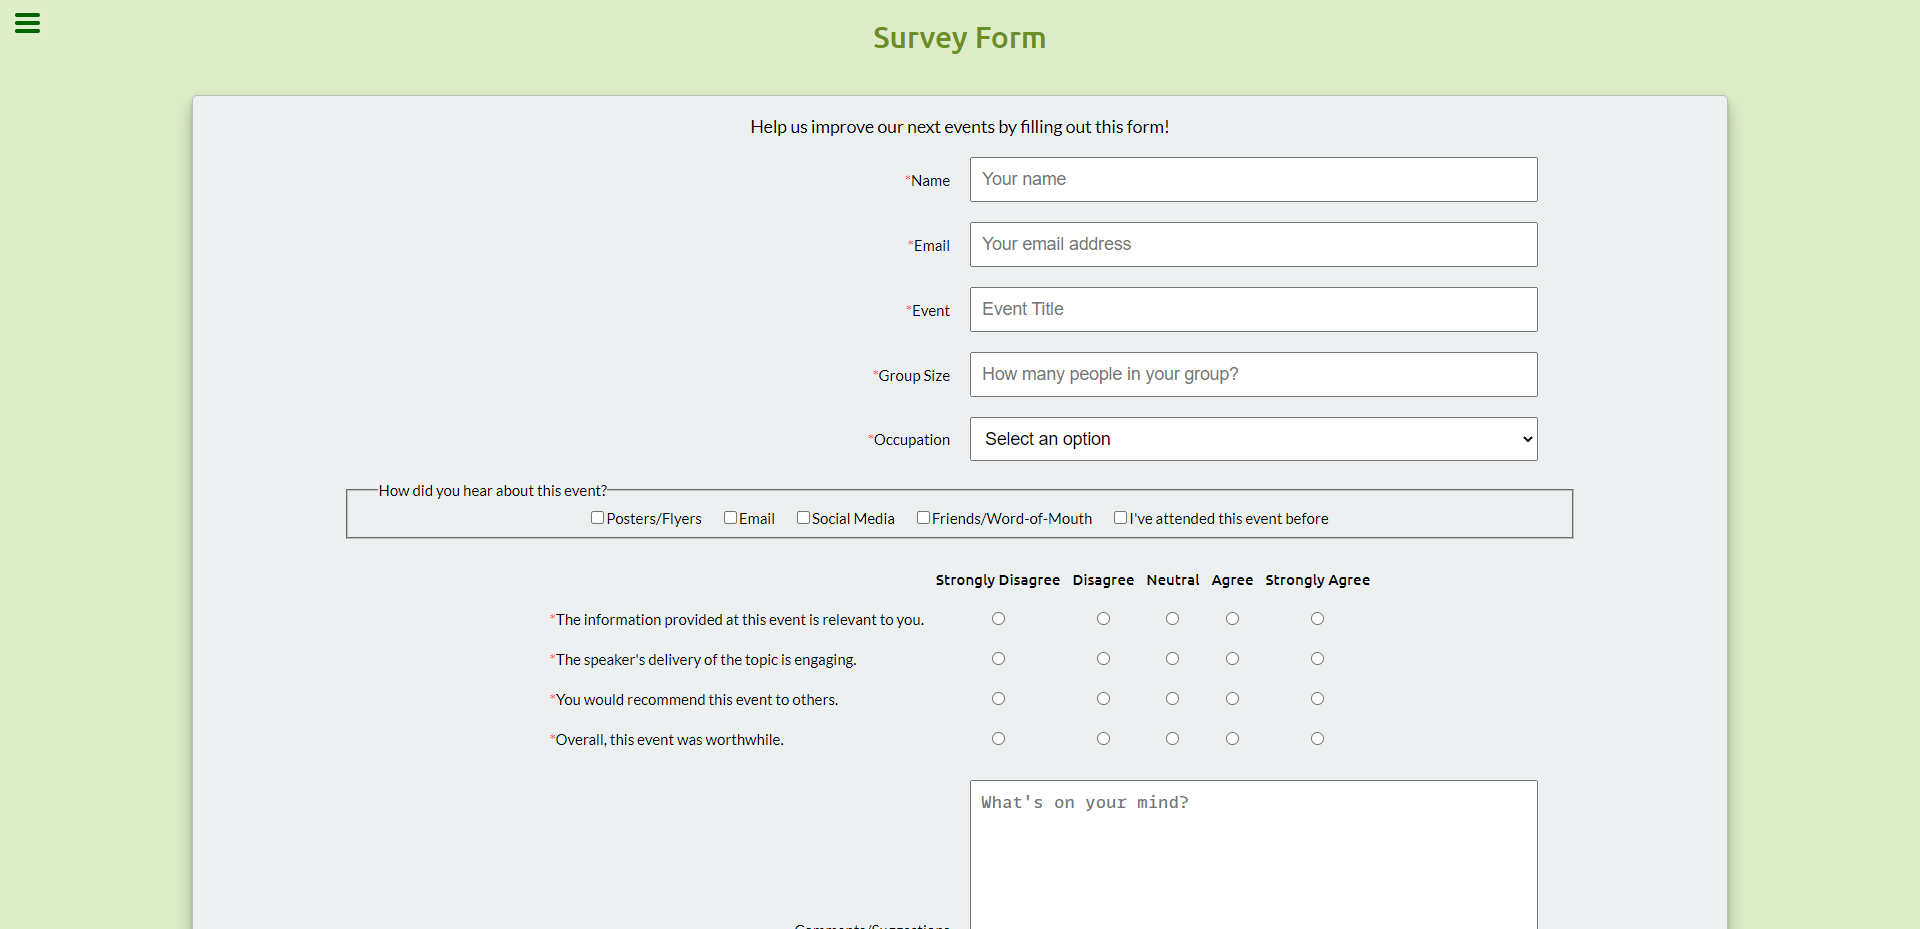 Screenshot of the freeCodeCamp Survey Form project